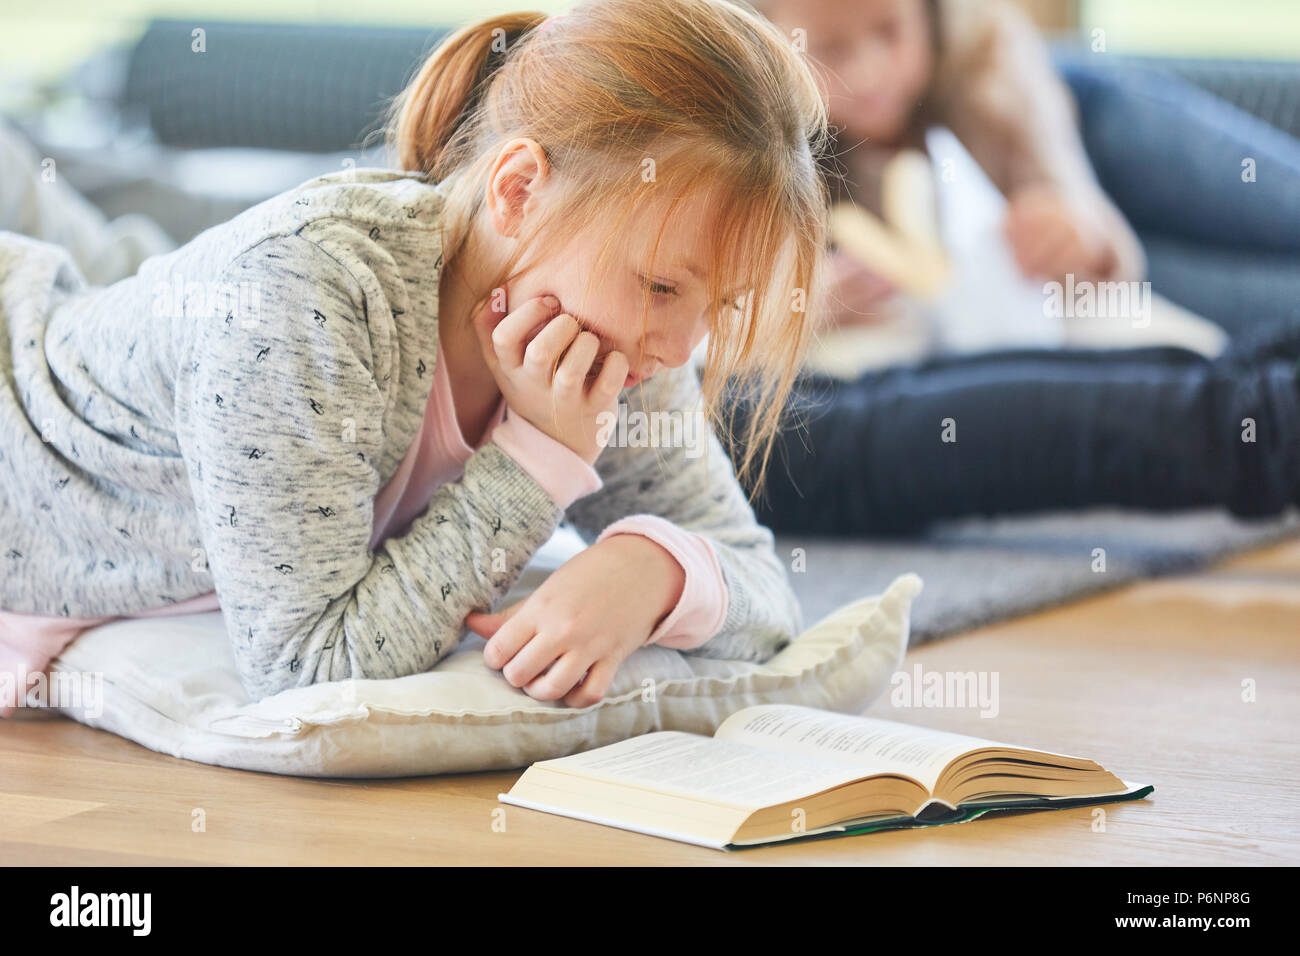 Blonde girl reads concentrated in a storybook or non-fiction book Stock Photo